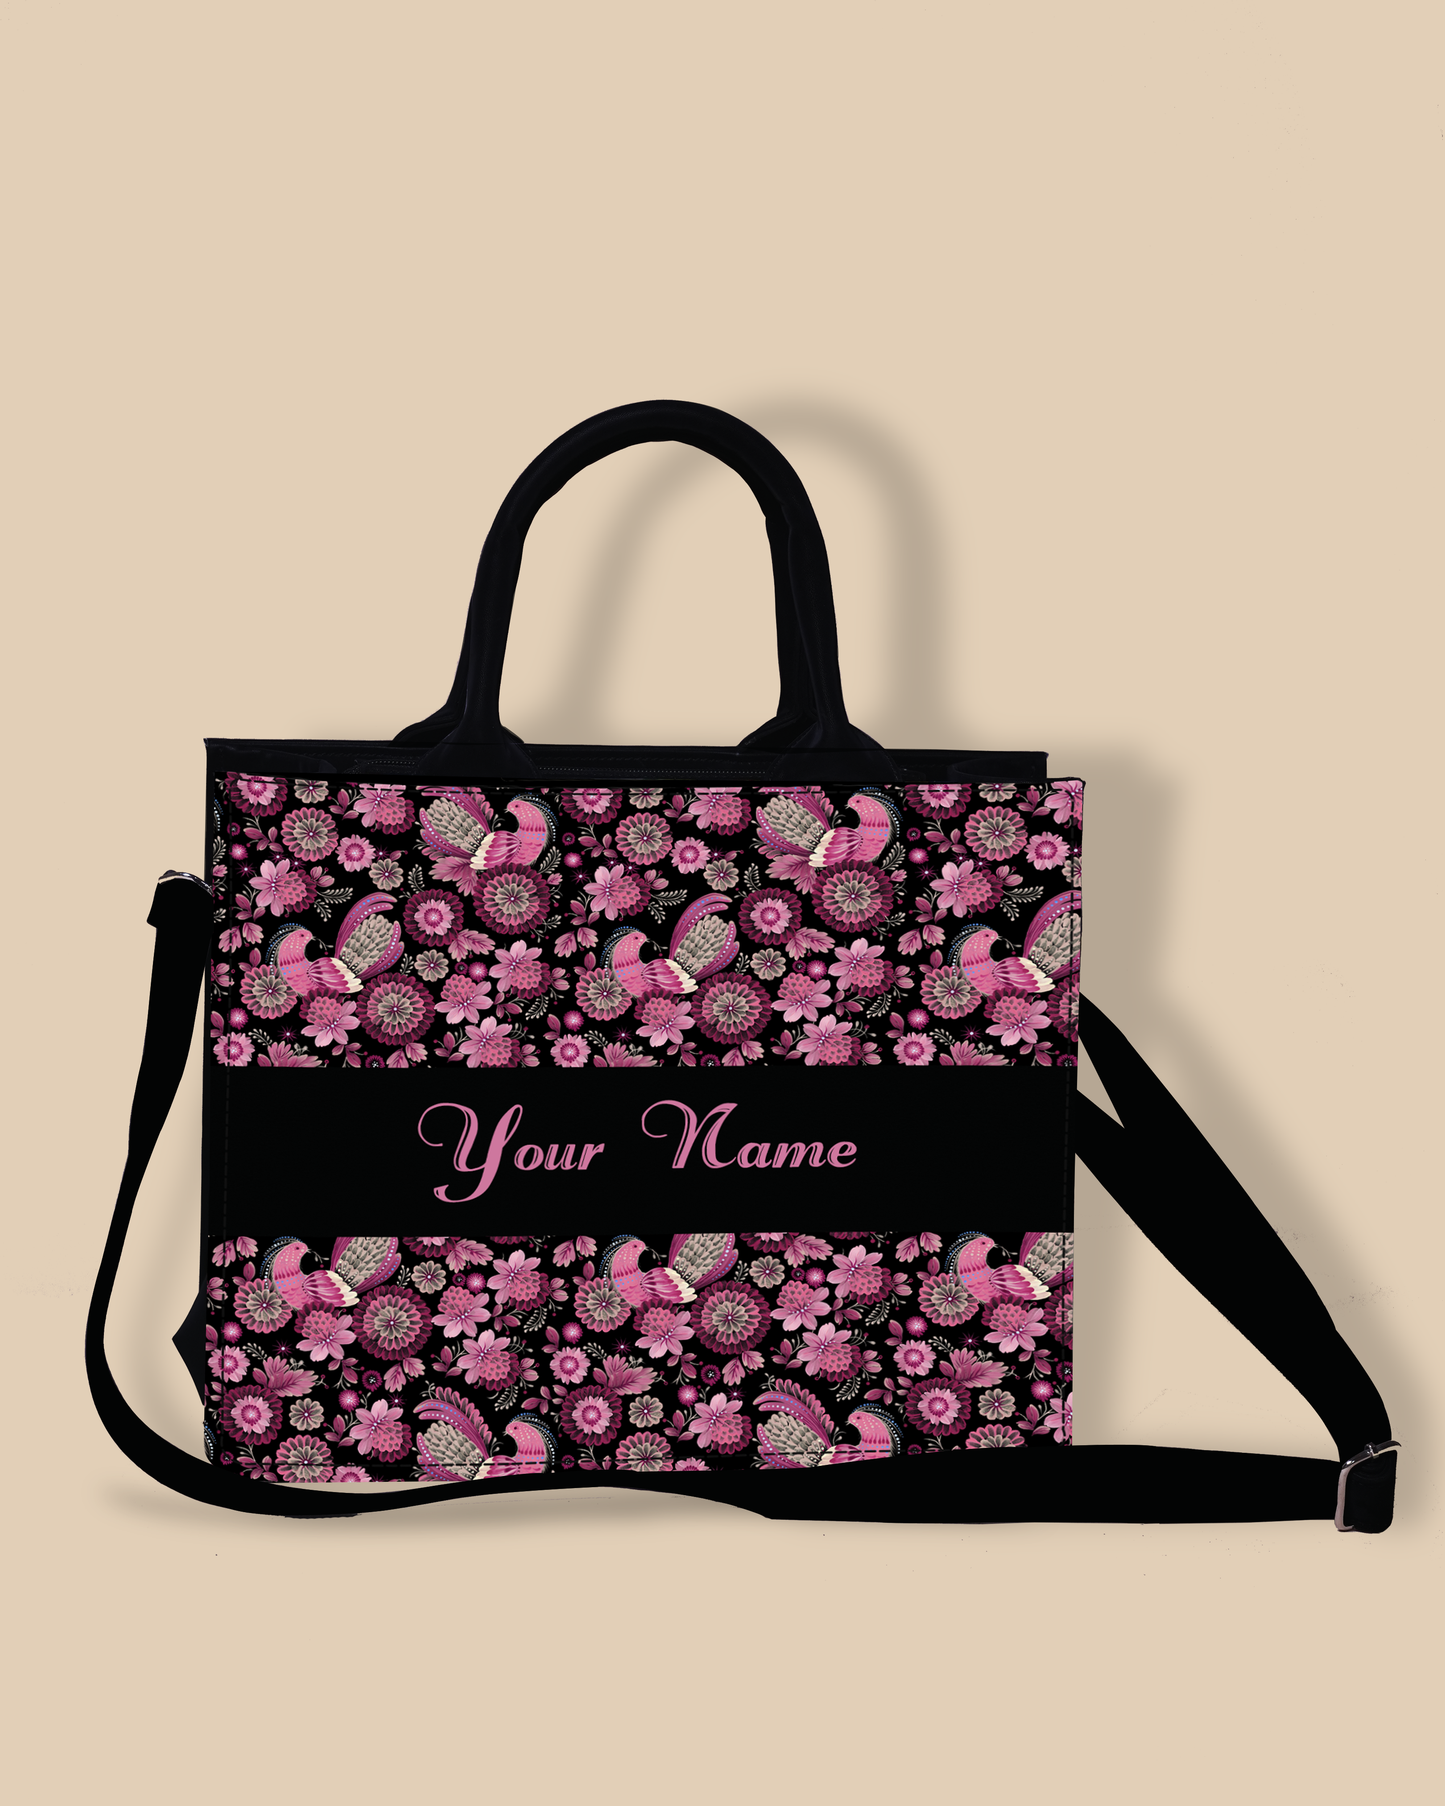 Personalized Small Tote Bag Designed With Calligraphic Flowers And Peacock Pattern